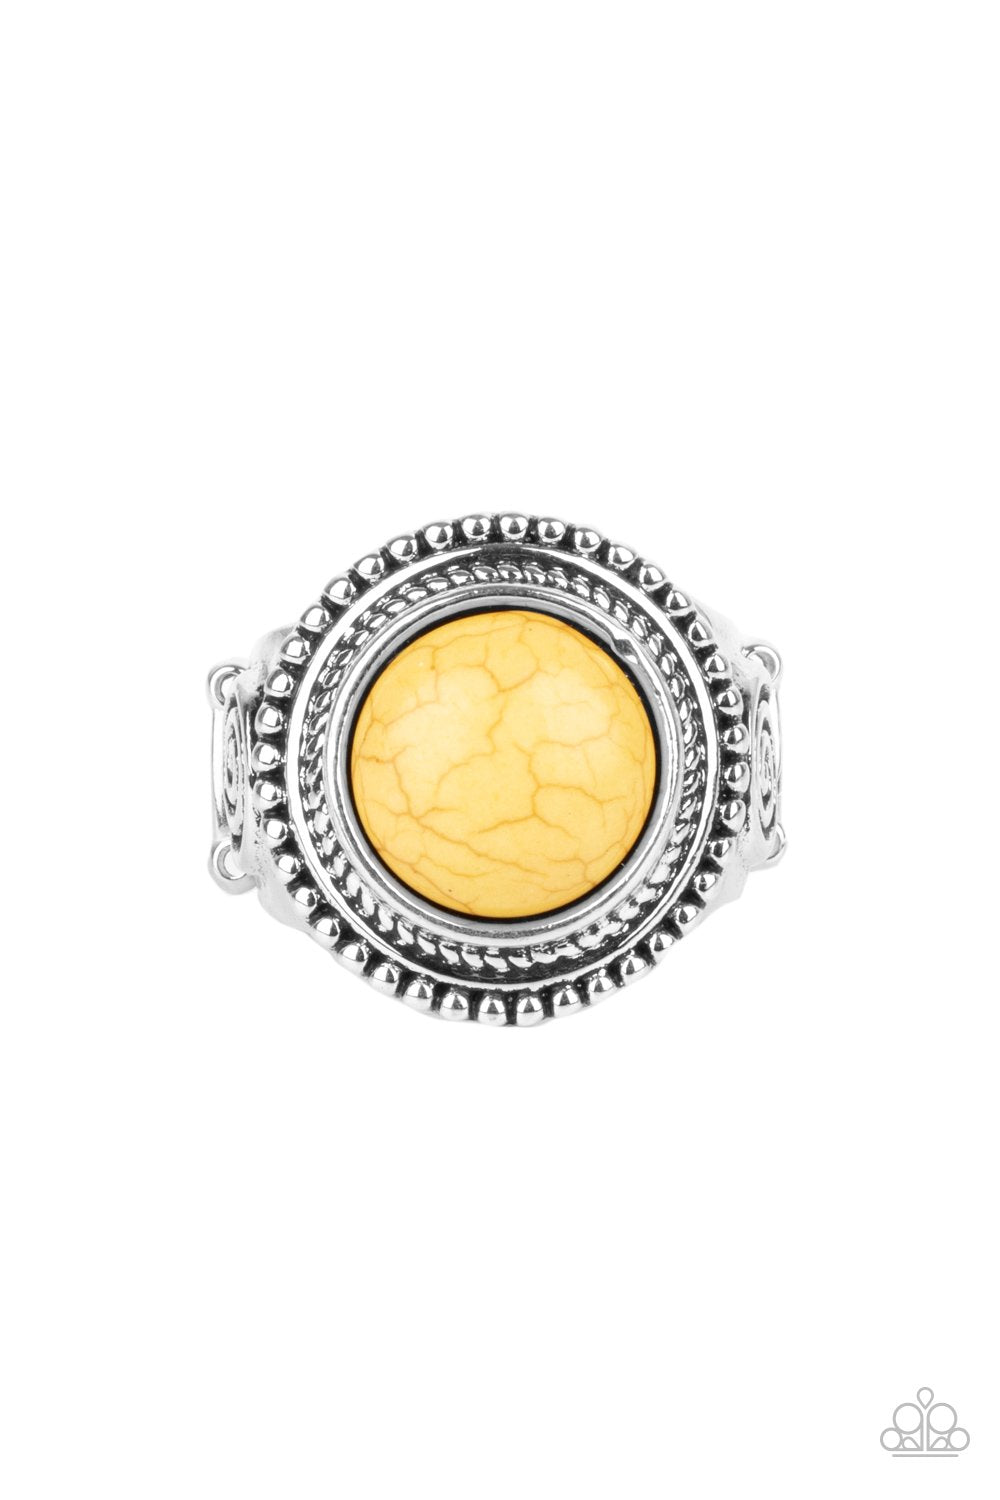 Evolutionary Essence Yellow Stone Ring - Paparazzi Accessories- lightbox - CarasShop.com - $5 Jewelry by Cara Jewels